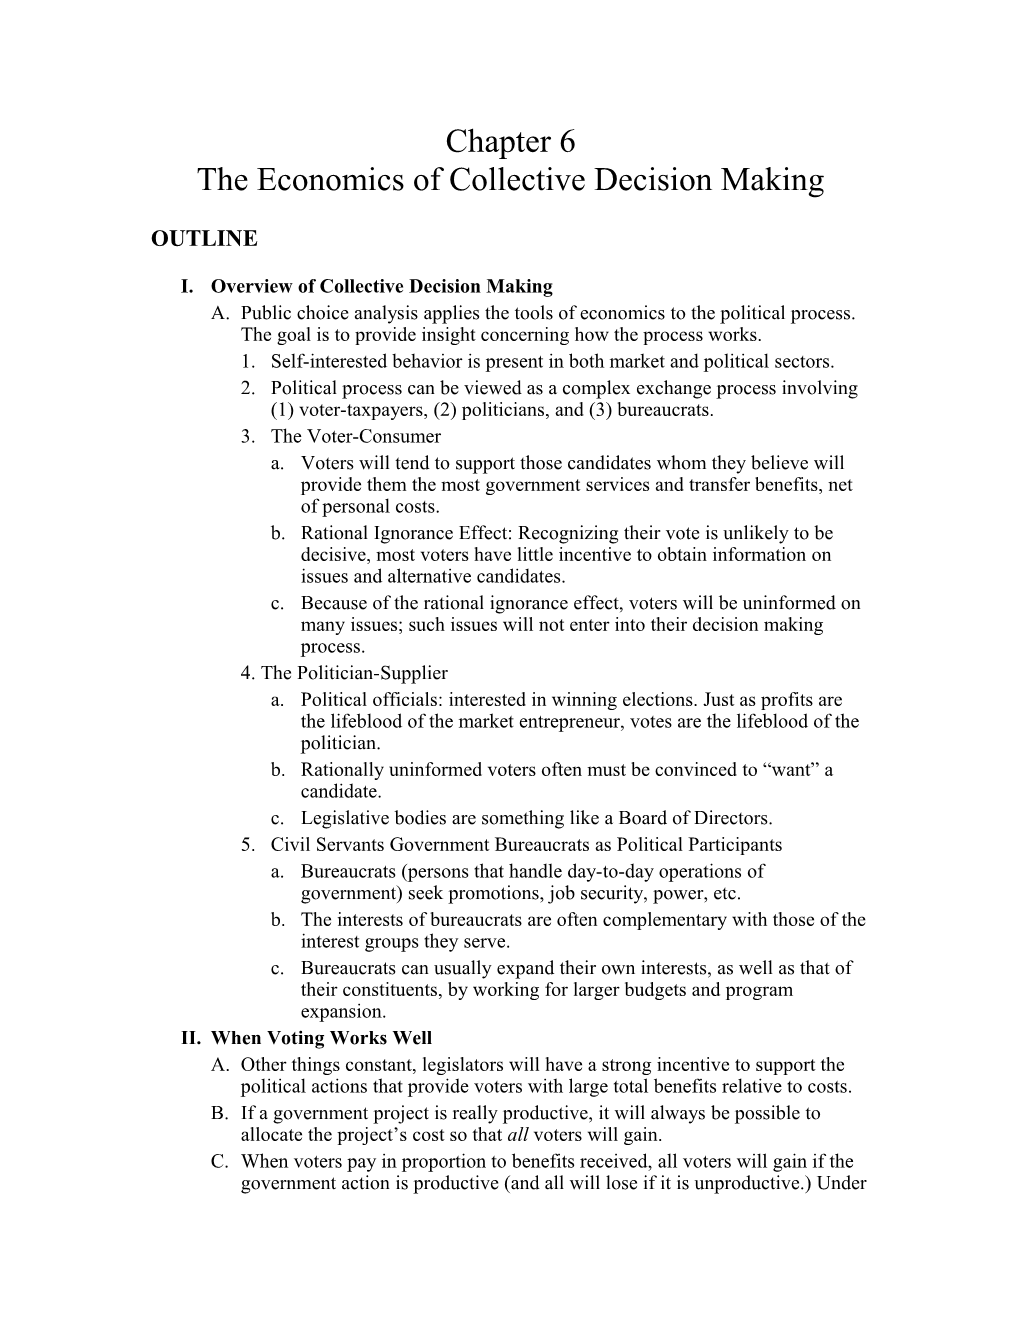 The Economics of Collective Decision Making